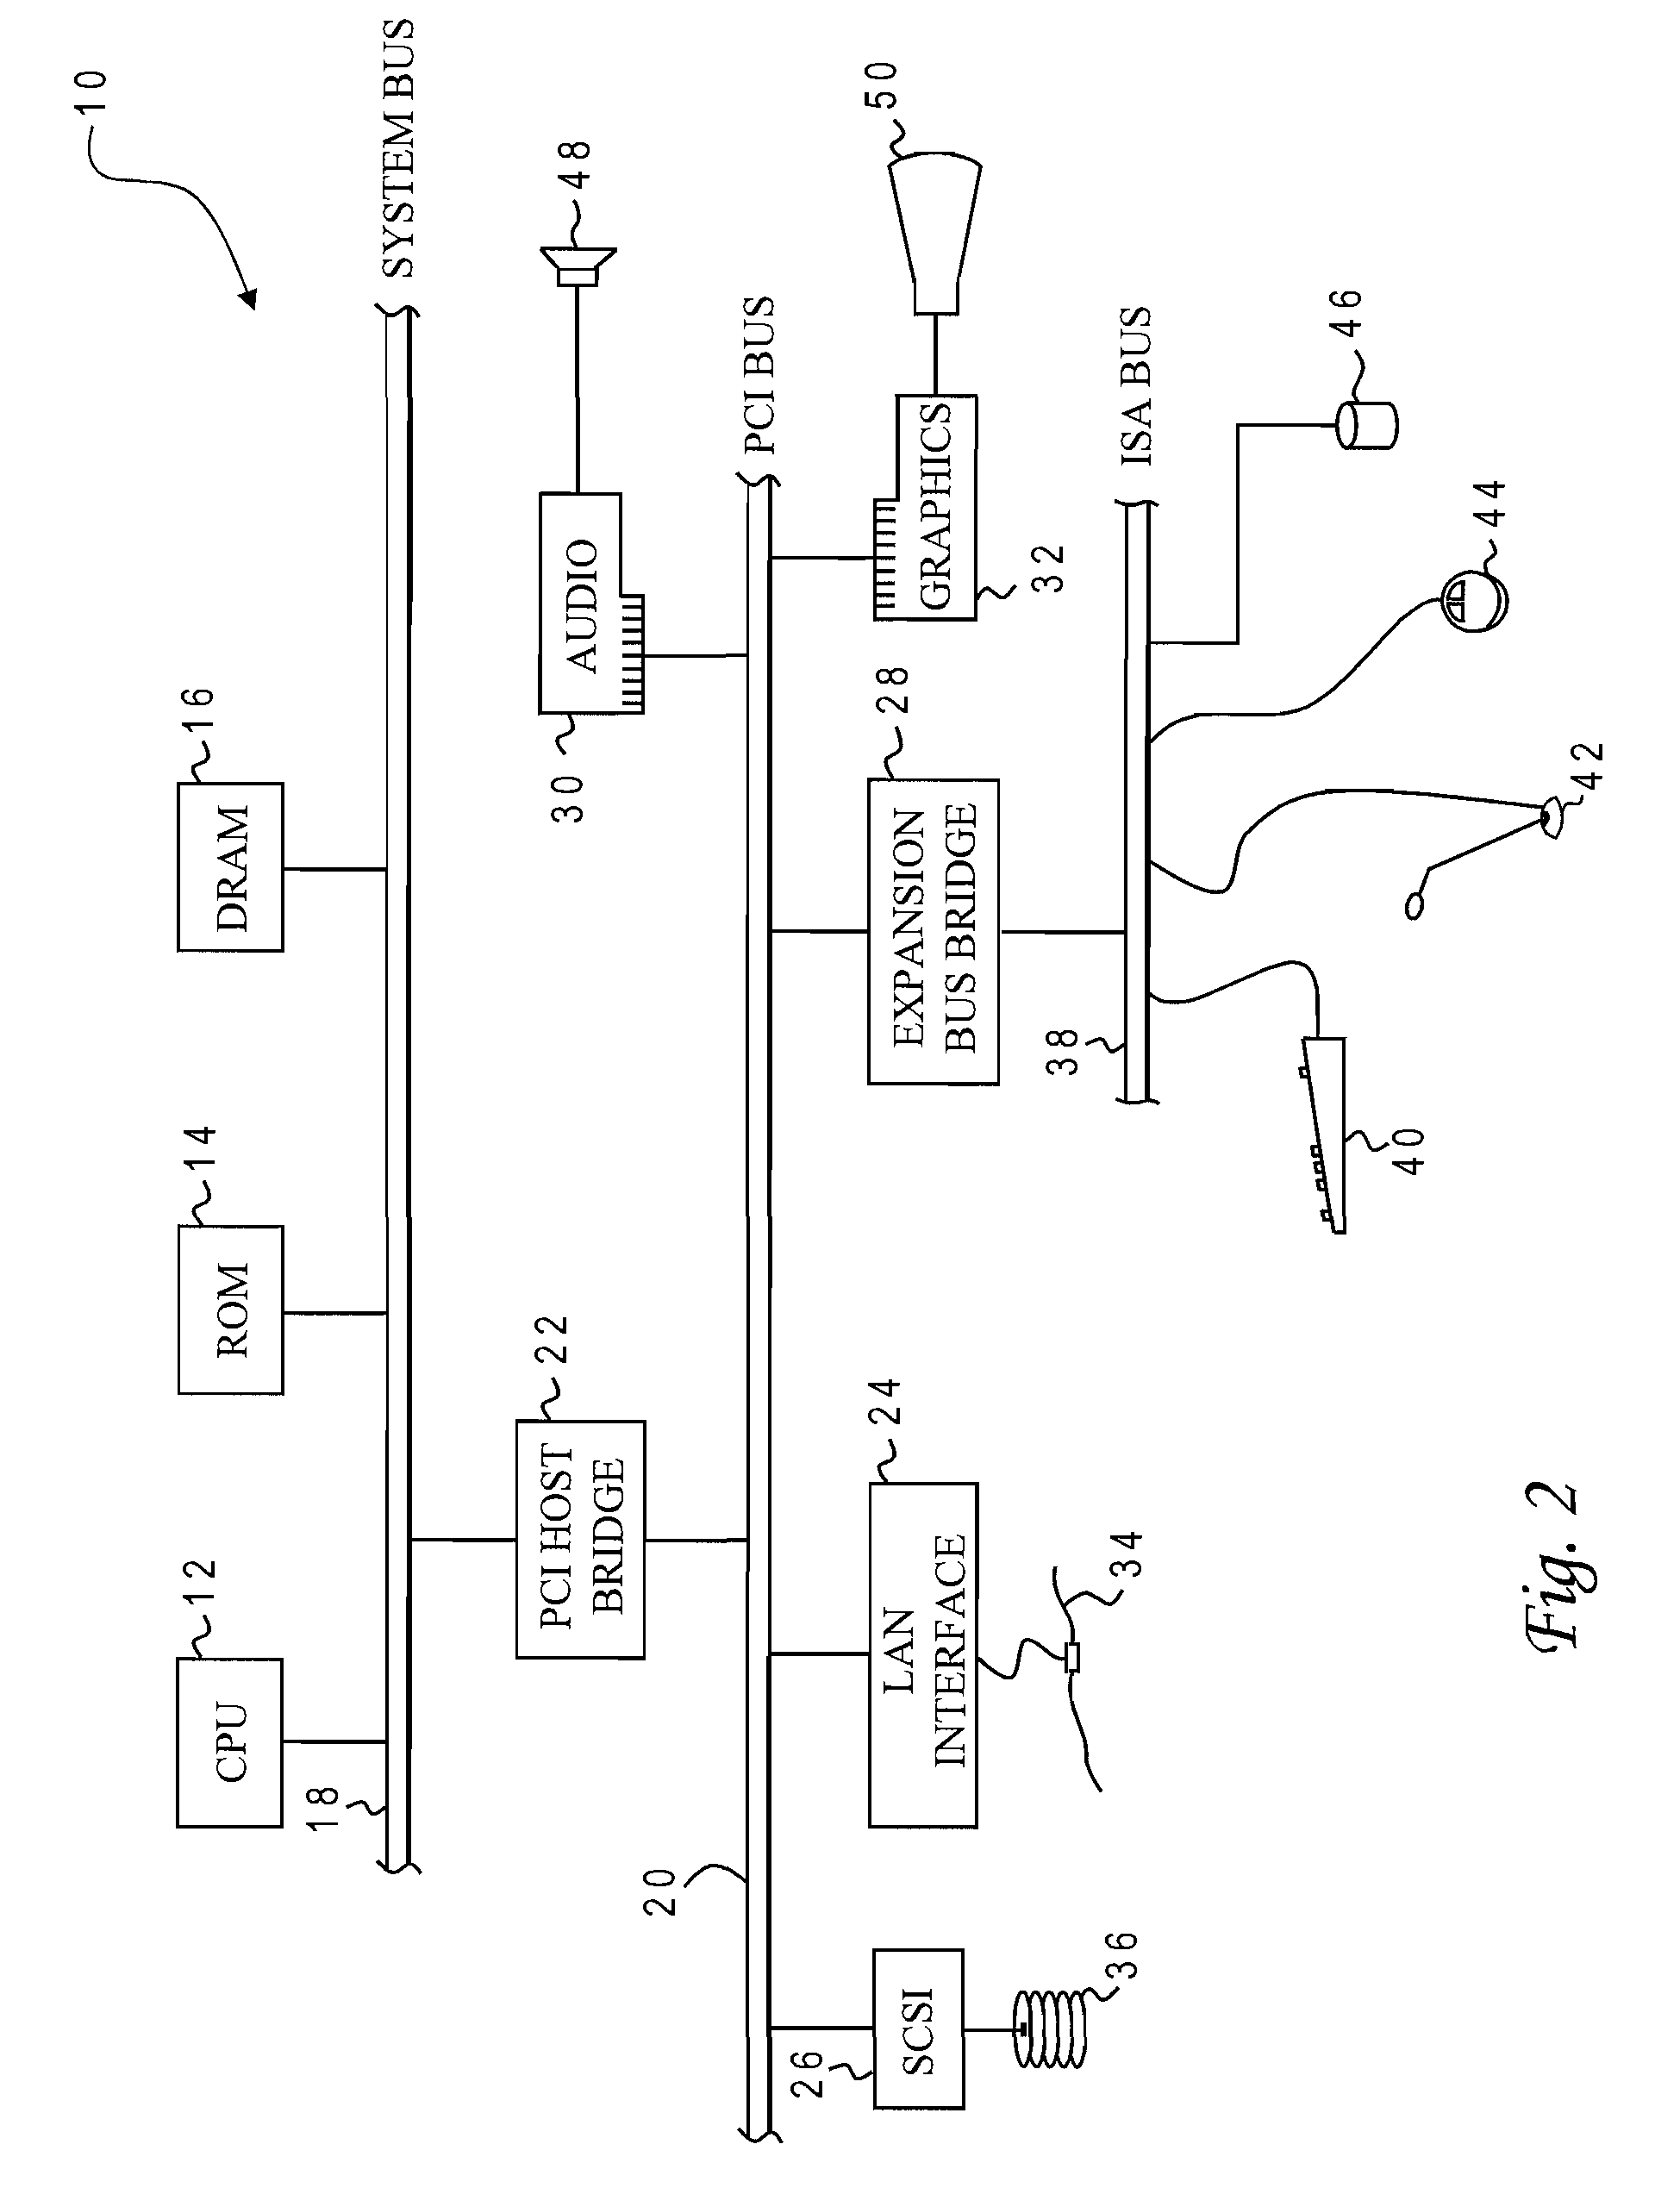 Buffer insertion to reduce wirelength in VLSI circuits